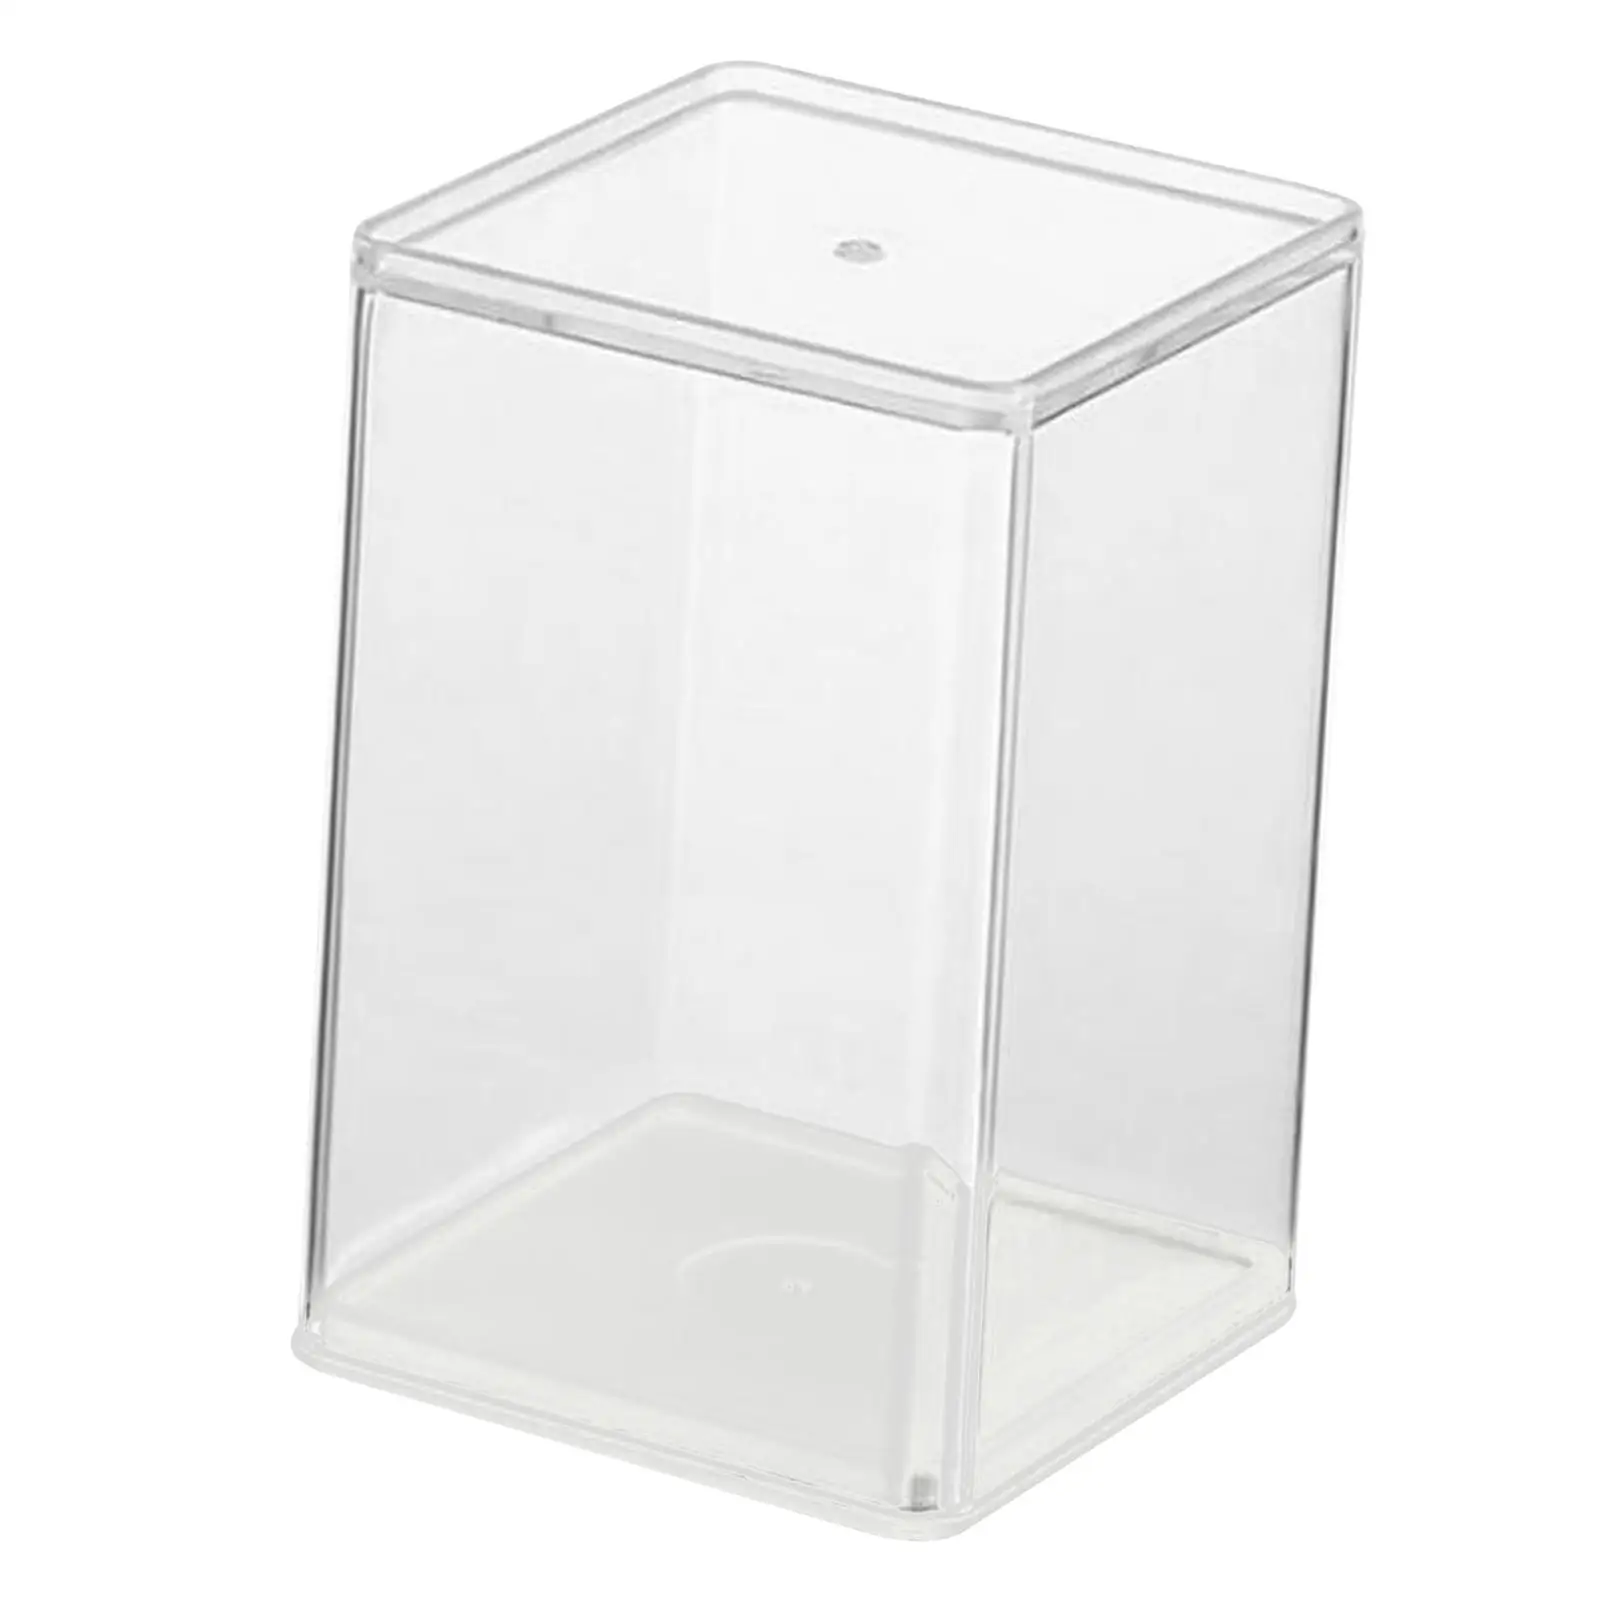 Transparent Acrylic Display Dust Proof Free Standing for Toys Kids